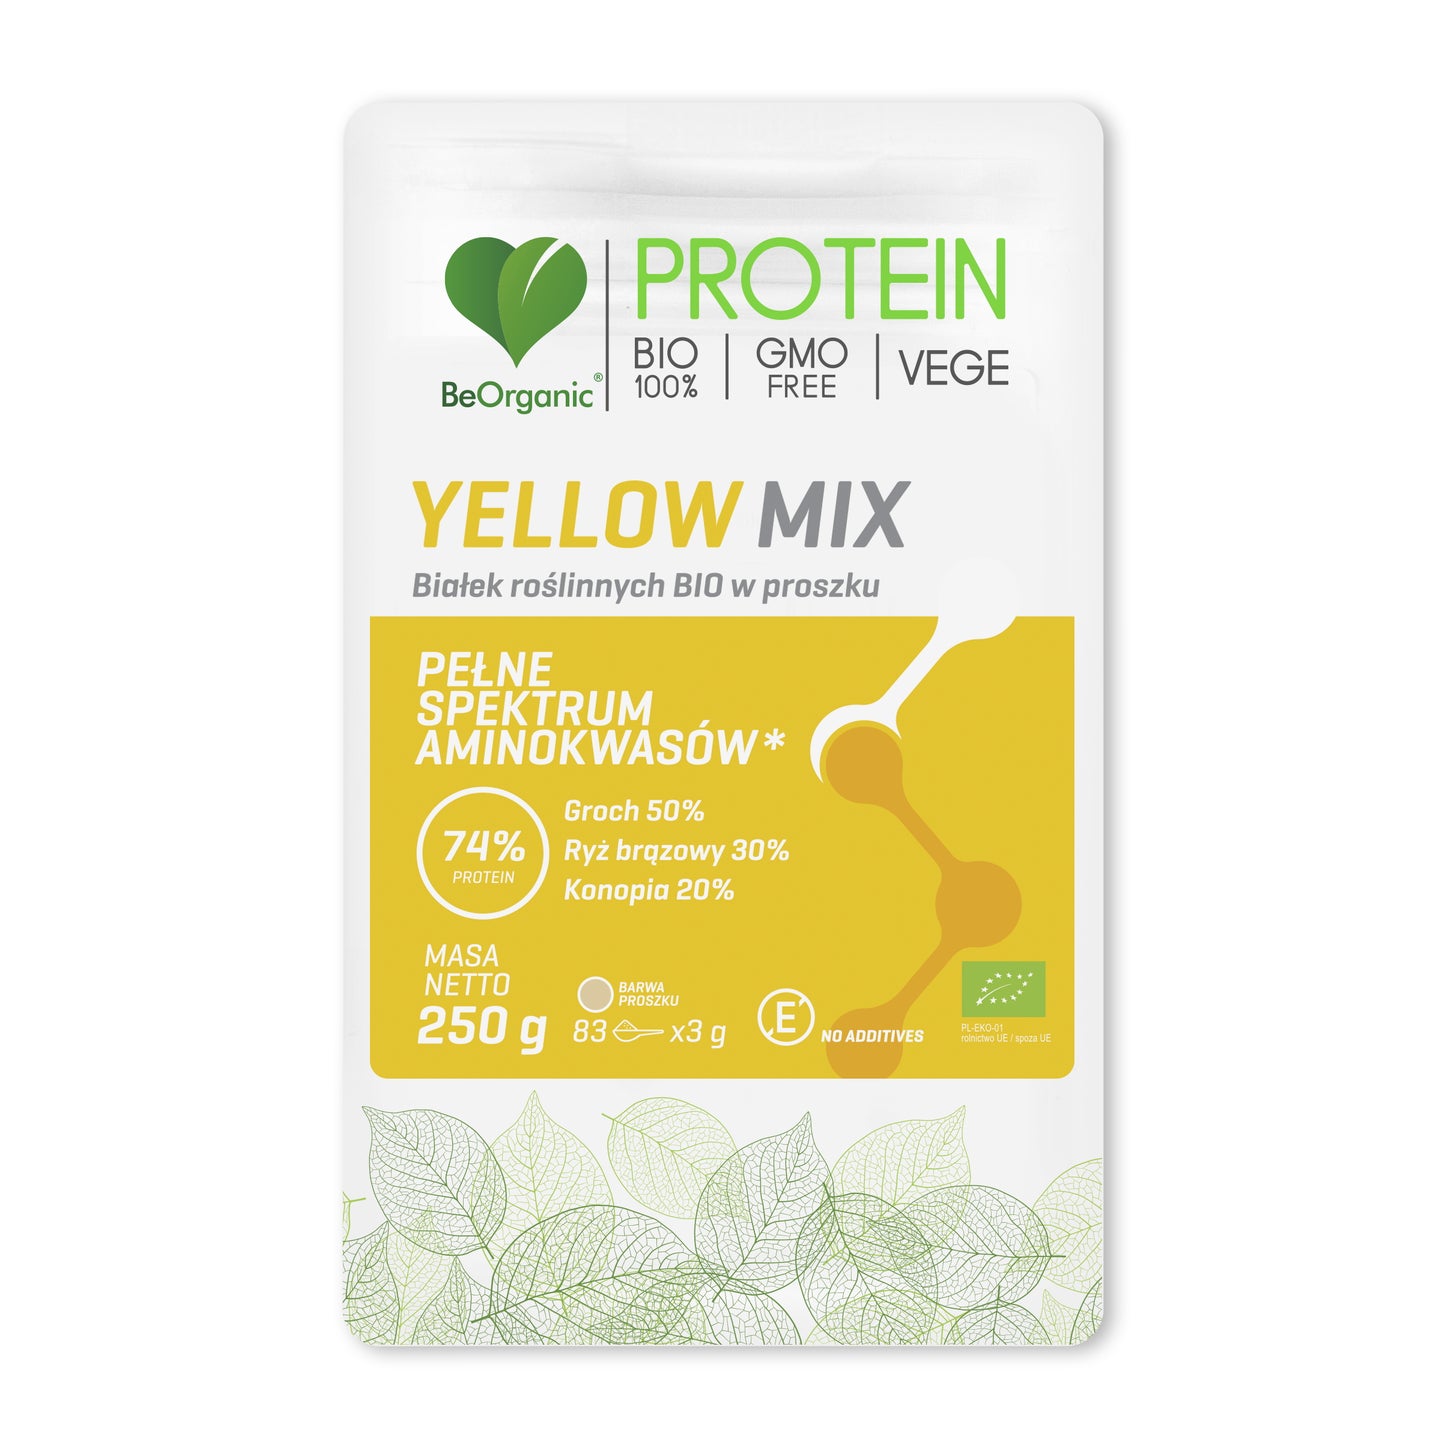 BeOrganic Yellow MIX of vegetable proteins, 250g